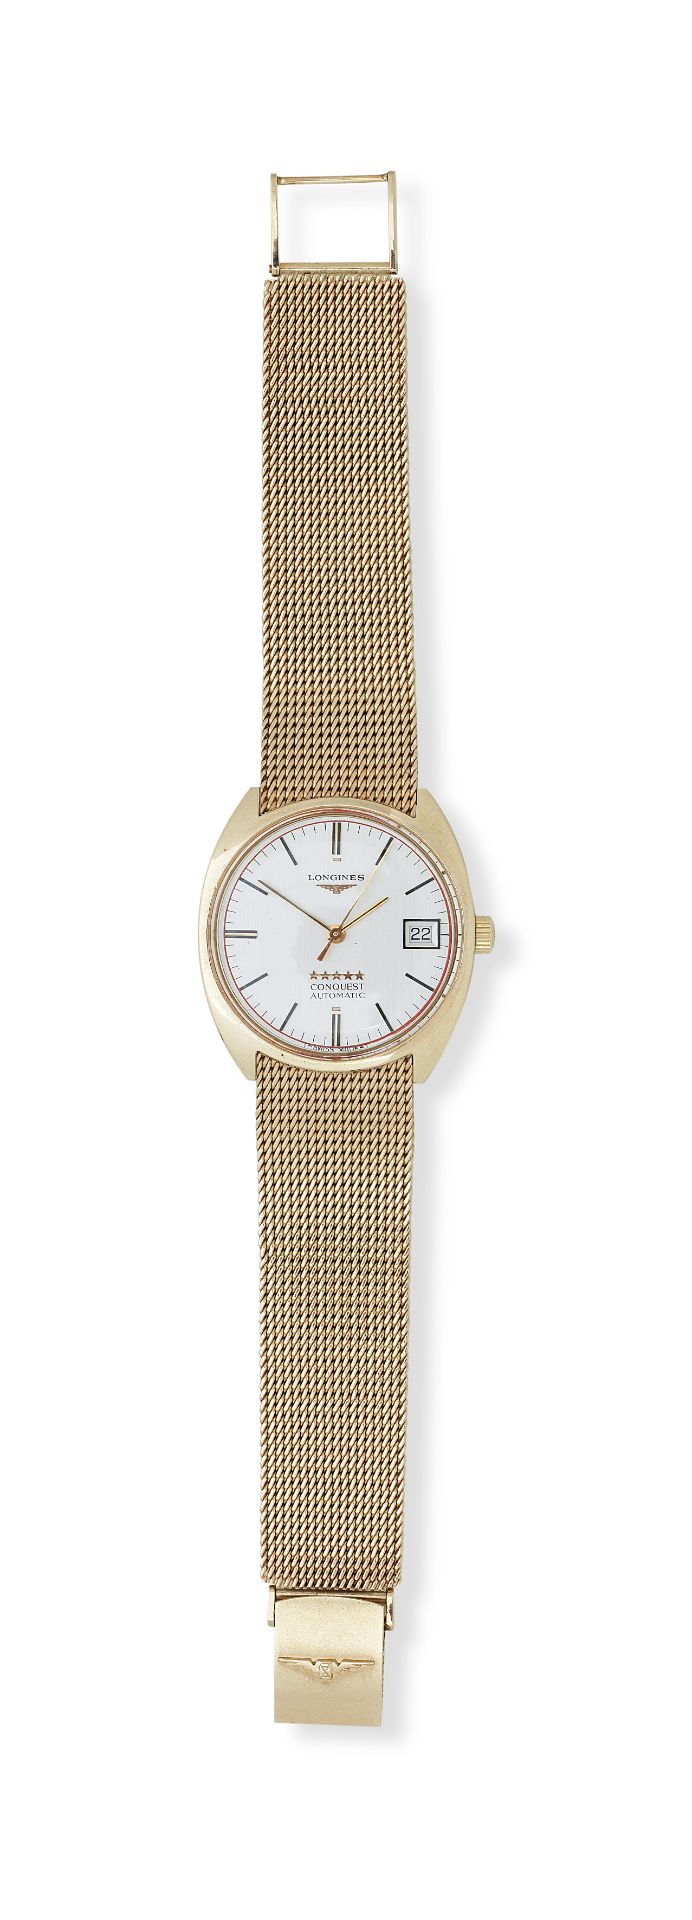 LONGINES: A 9CT GOLD AUTOMATIC 'CONQUEST' WRISTWATCH